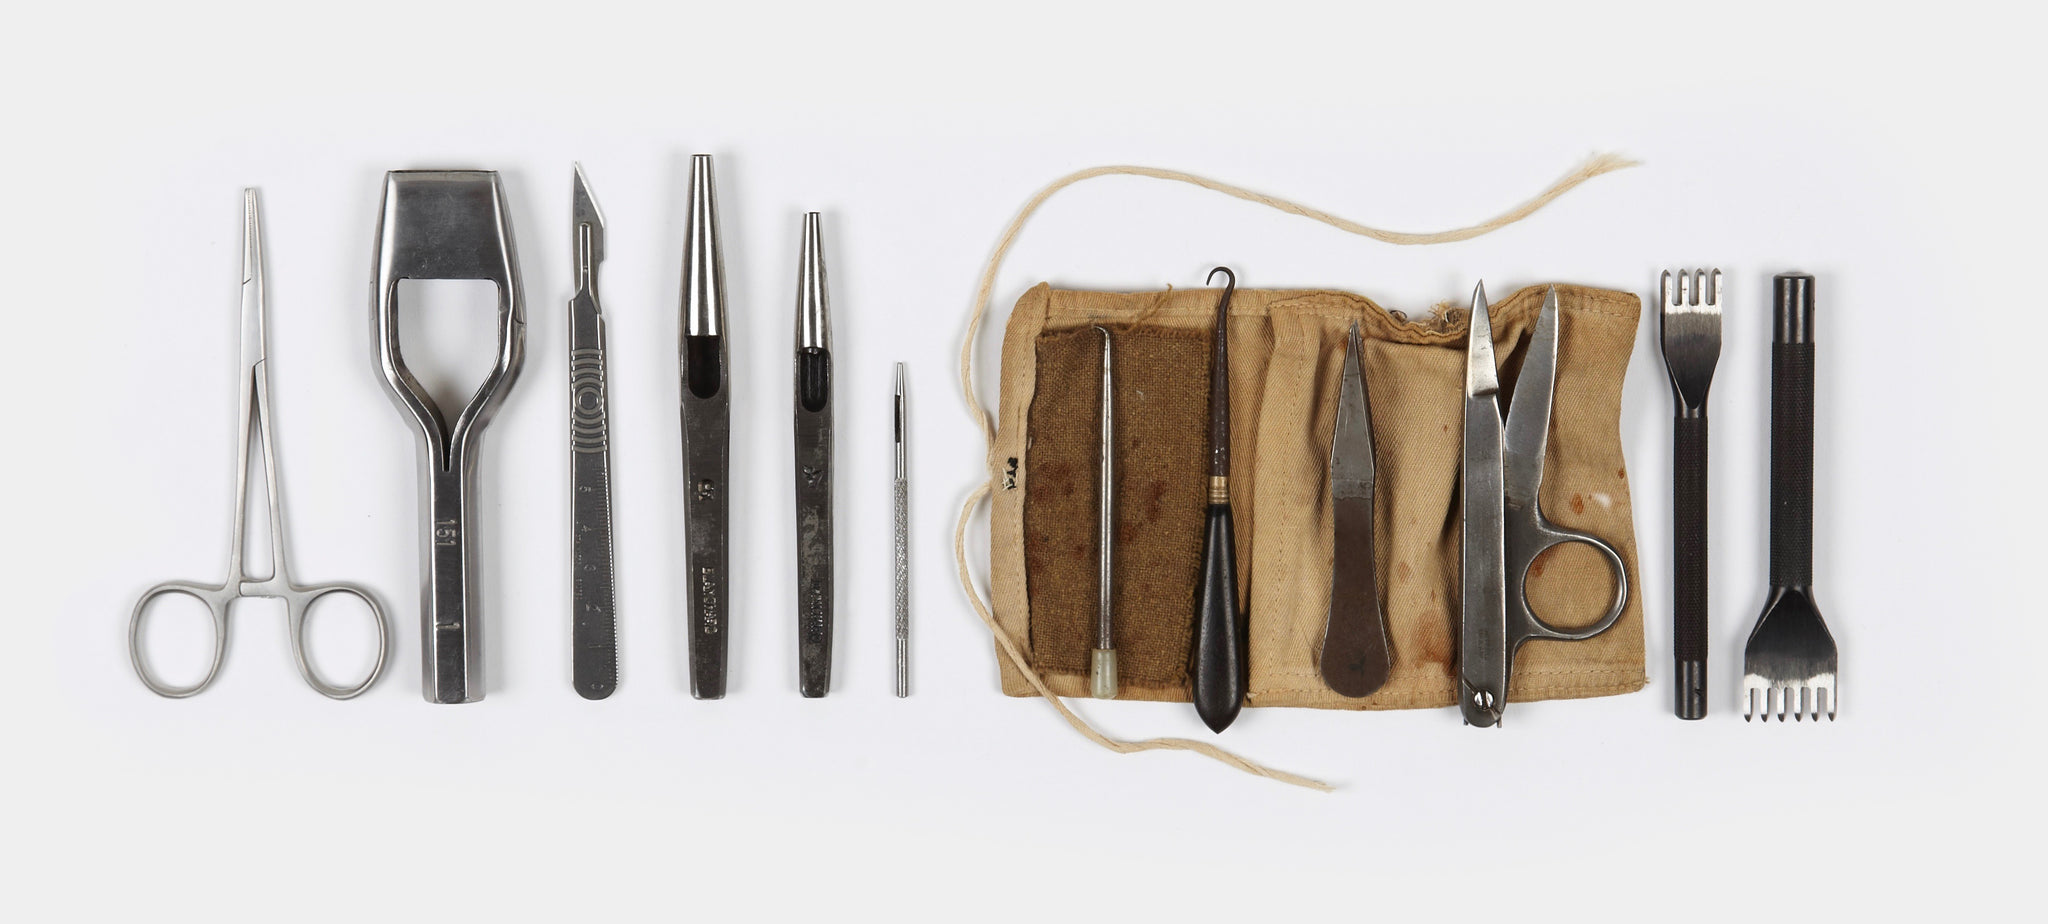 Tools and instruments for leather craftsmanship